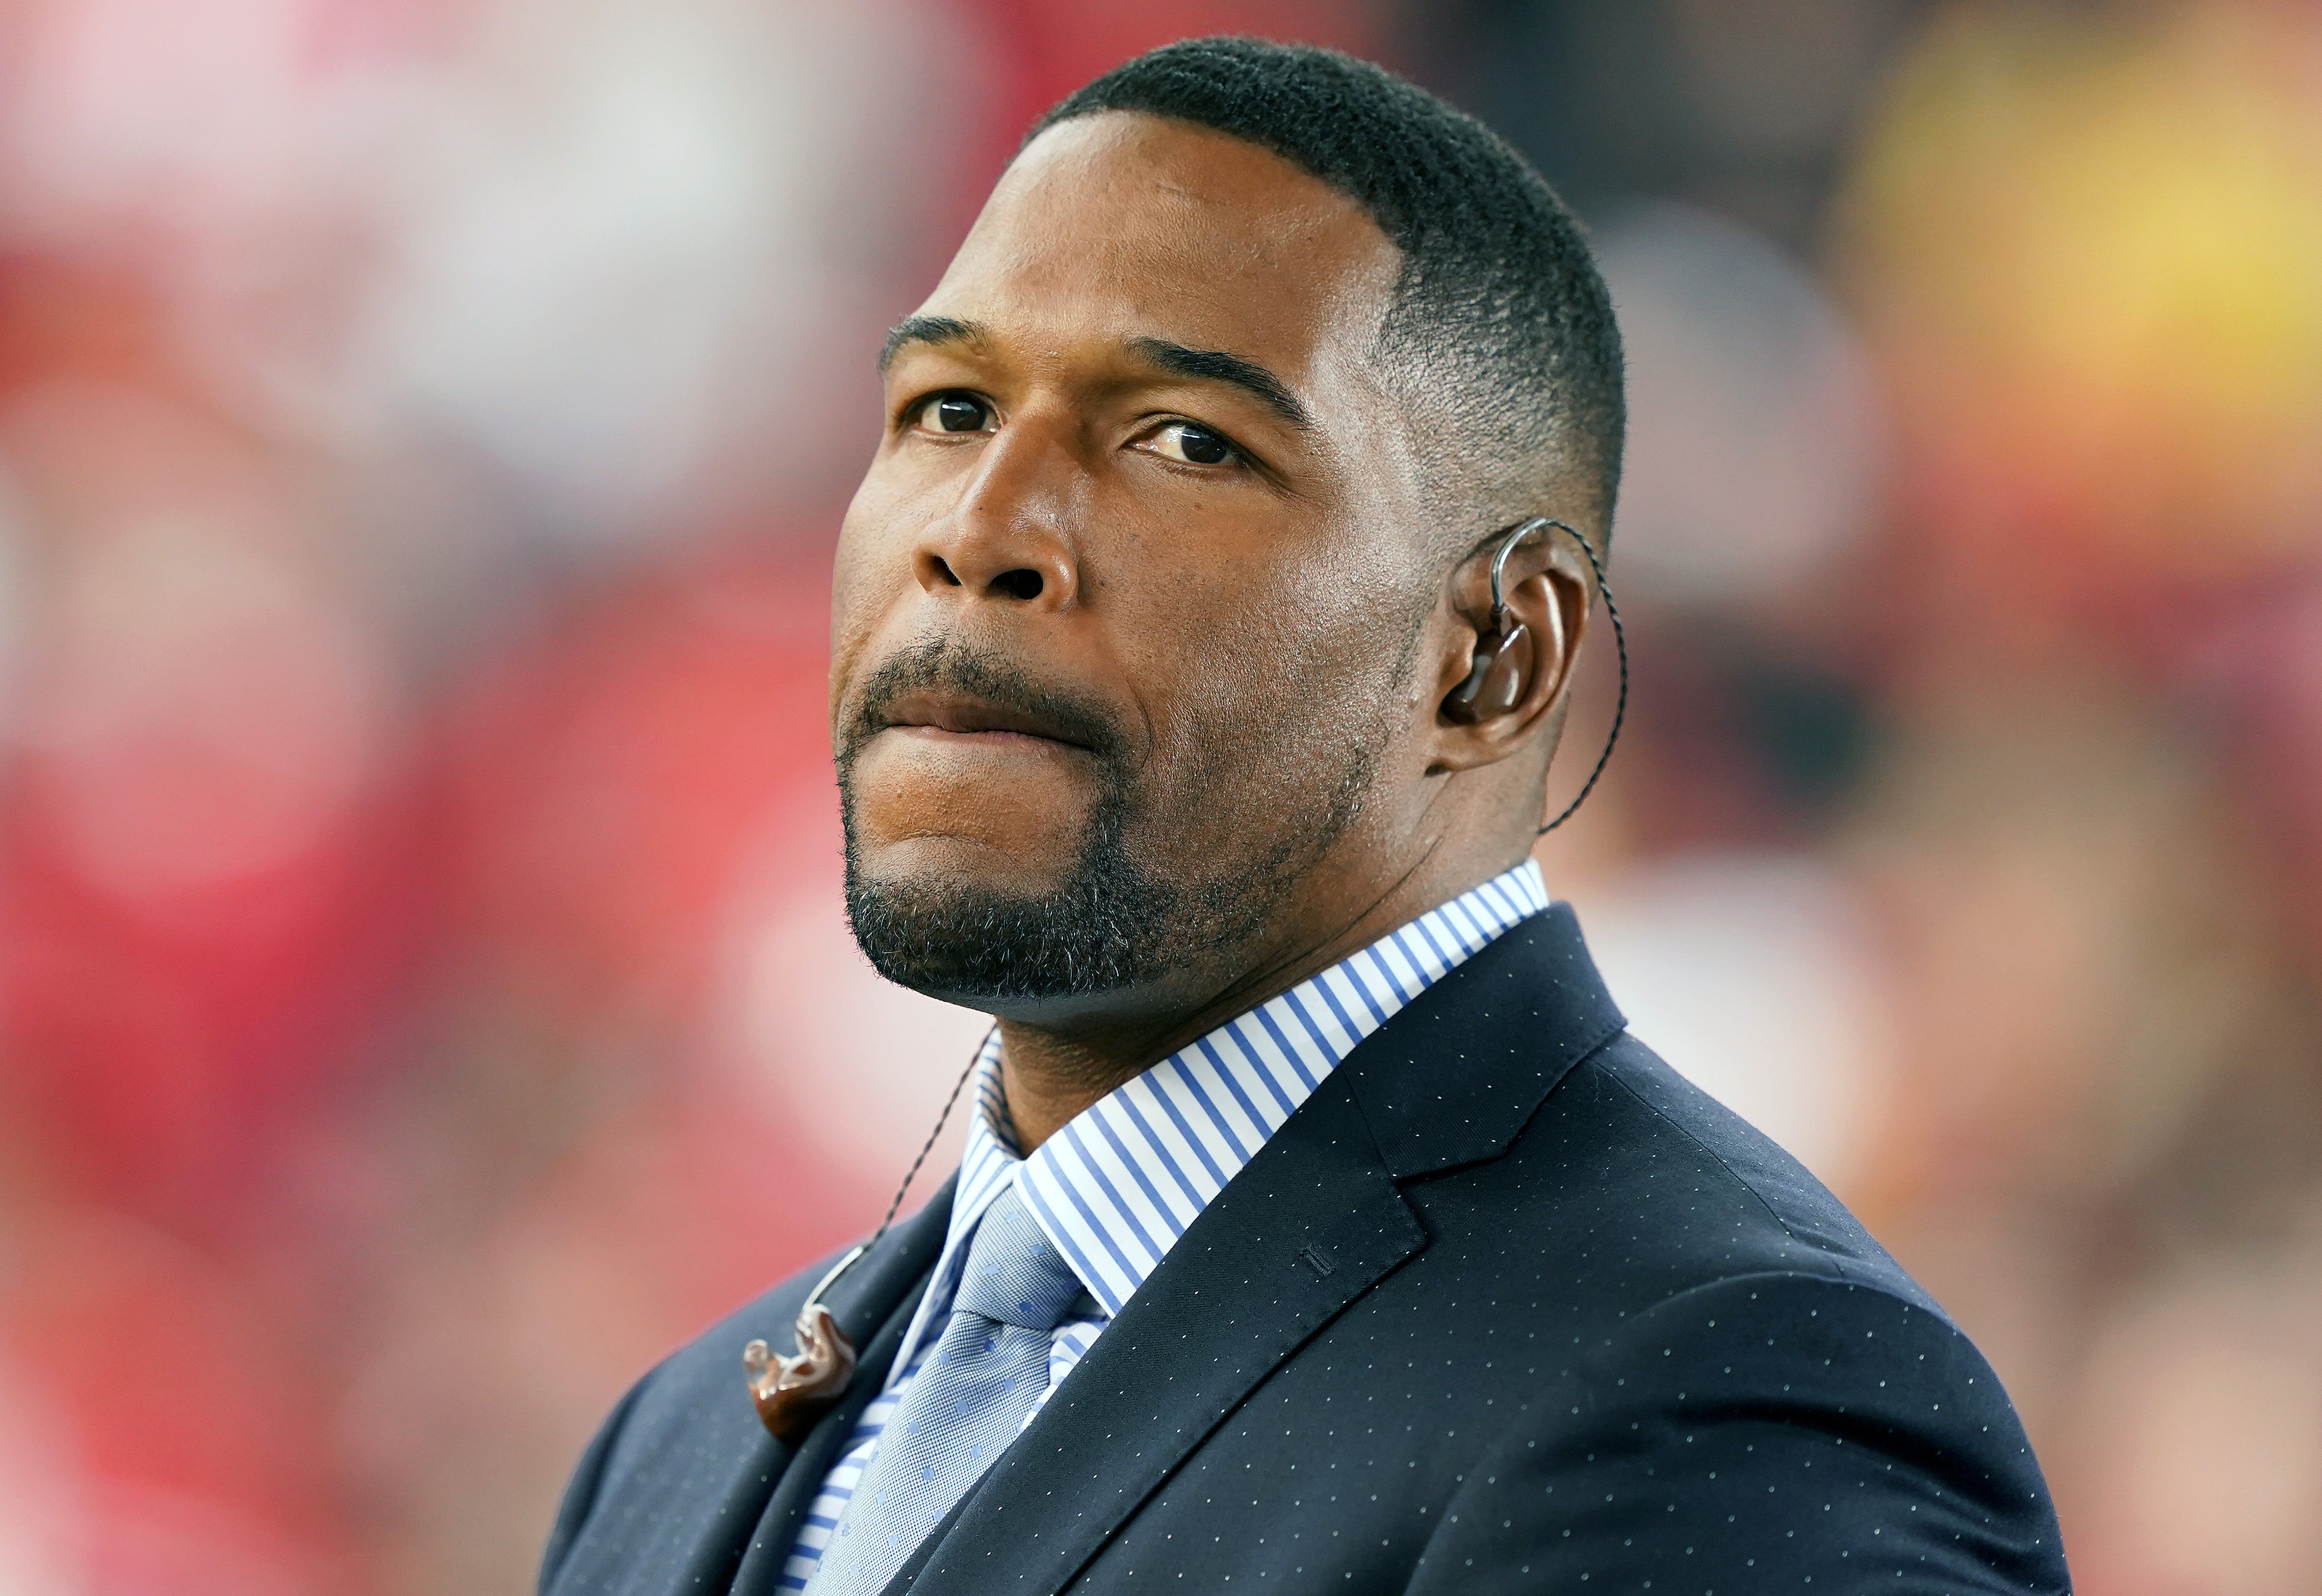 TV host Michael Strahan attends the NFC Championship game at Levi's Stadium in January 2020 in Santa Clara, California. | Photo: Getty Images